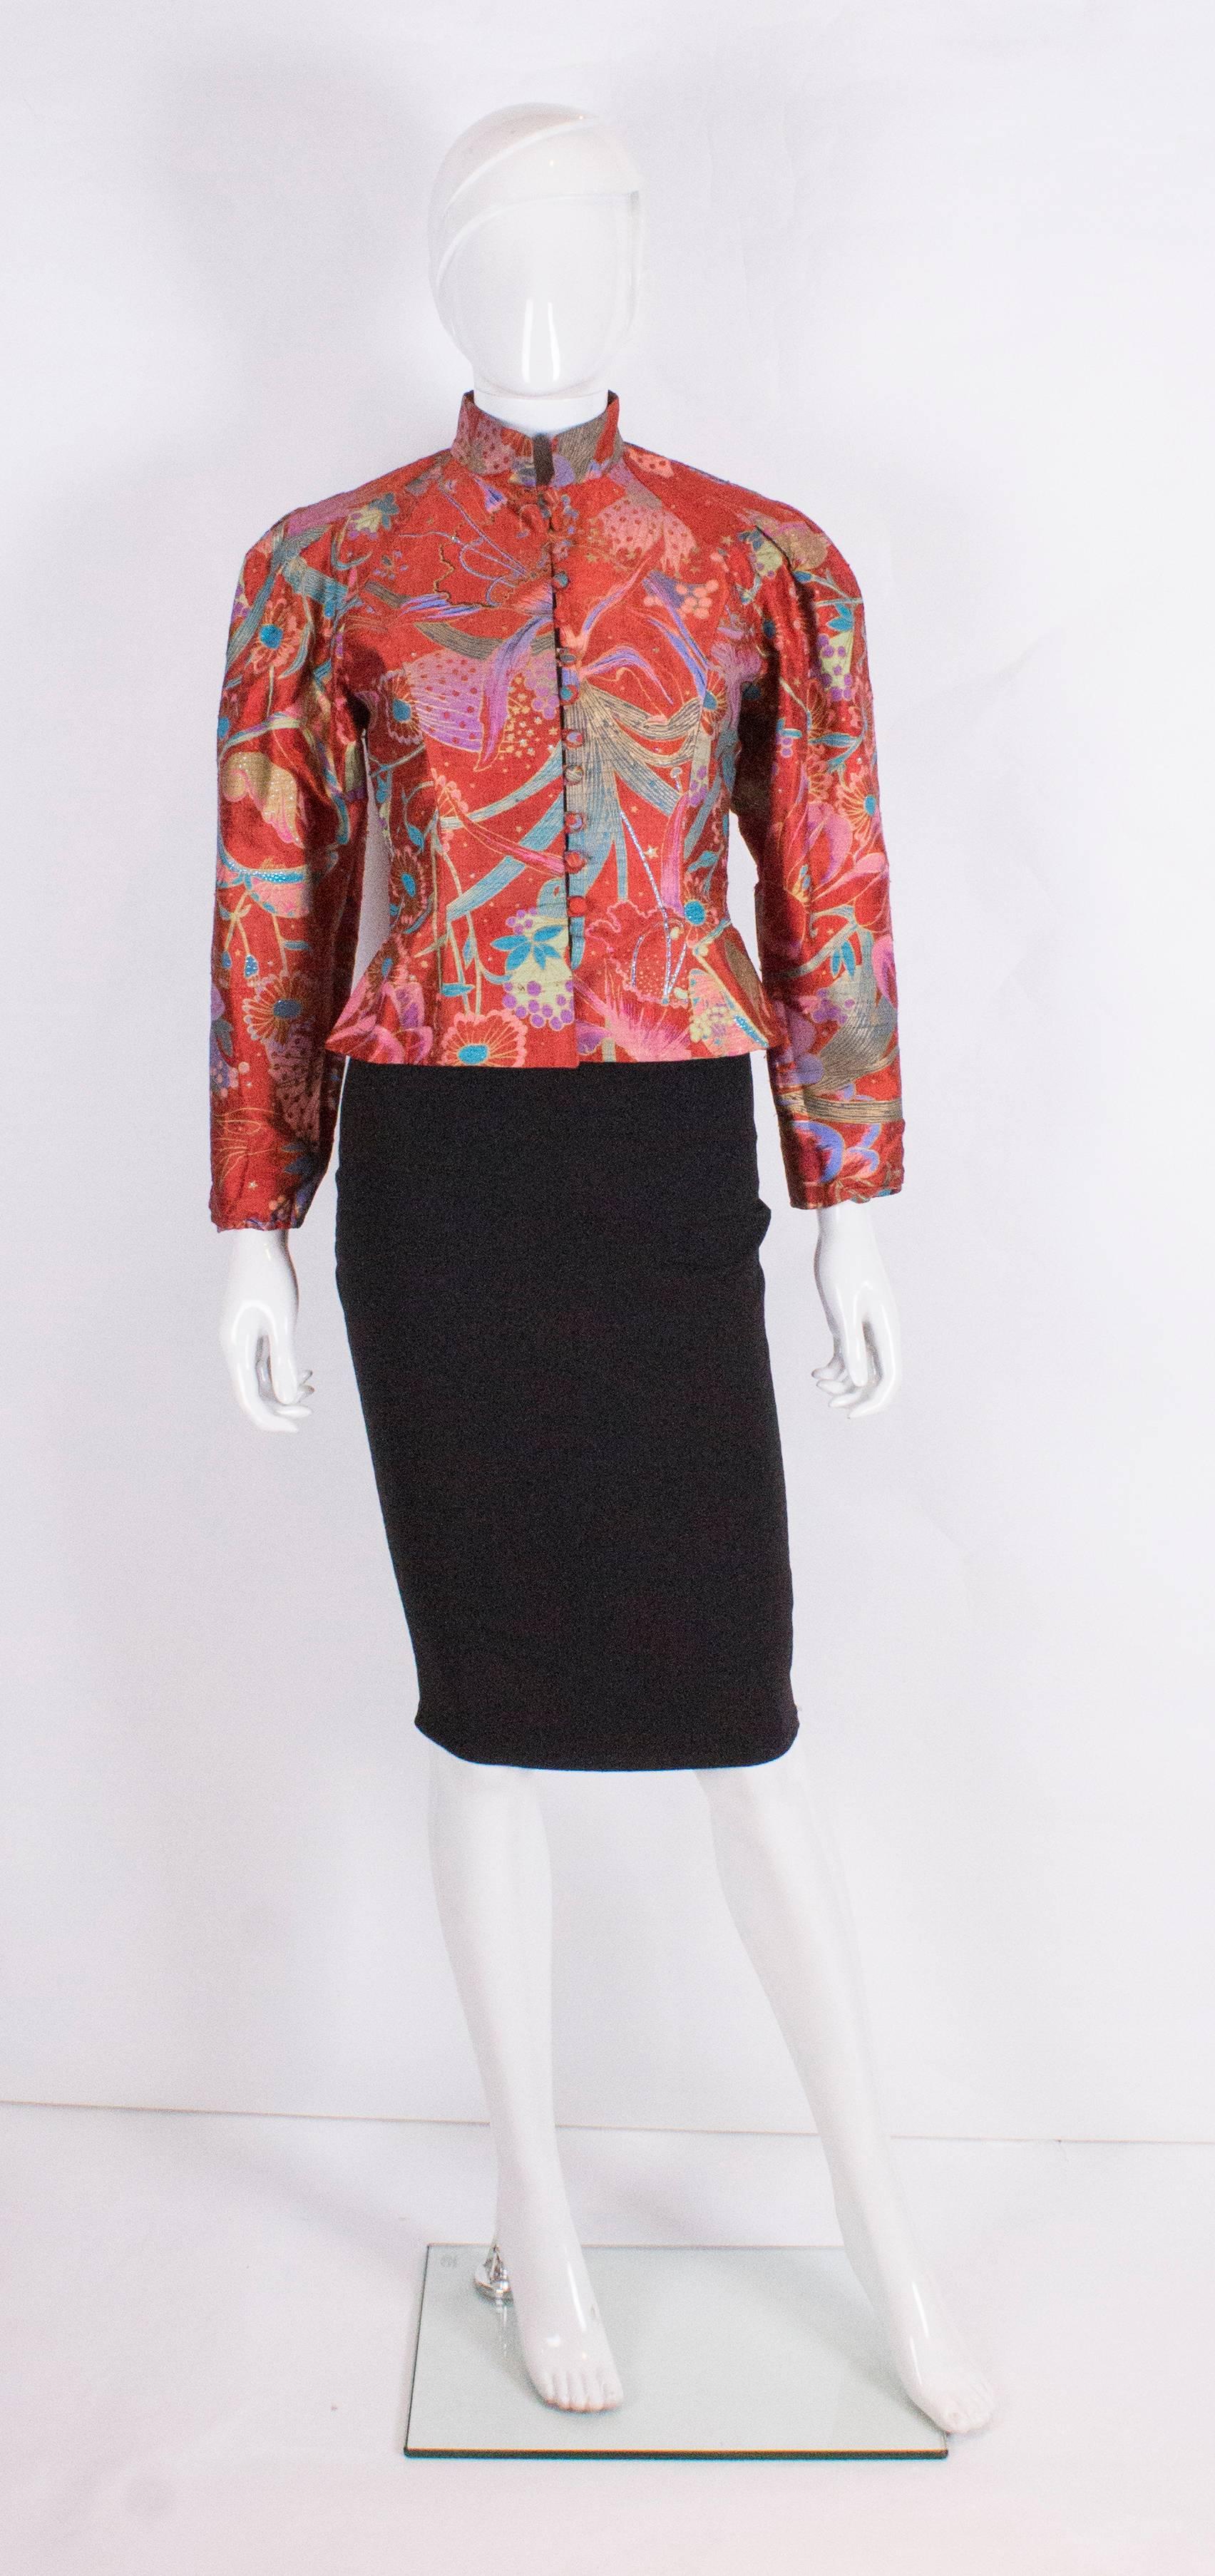 A pretty silk jacket by Caroline Charles. The jacket has a red background with a blue, gold and pink print. The jacket has a stand up collar, button front, gathered sleeves, and is flared at the waist.